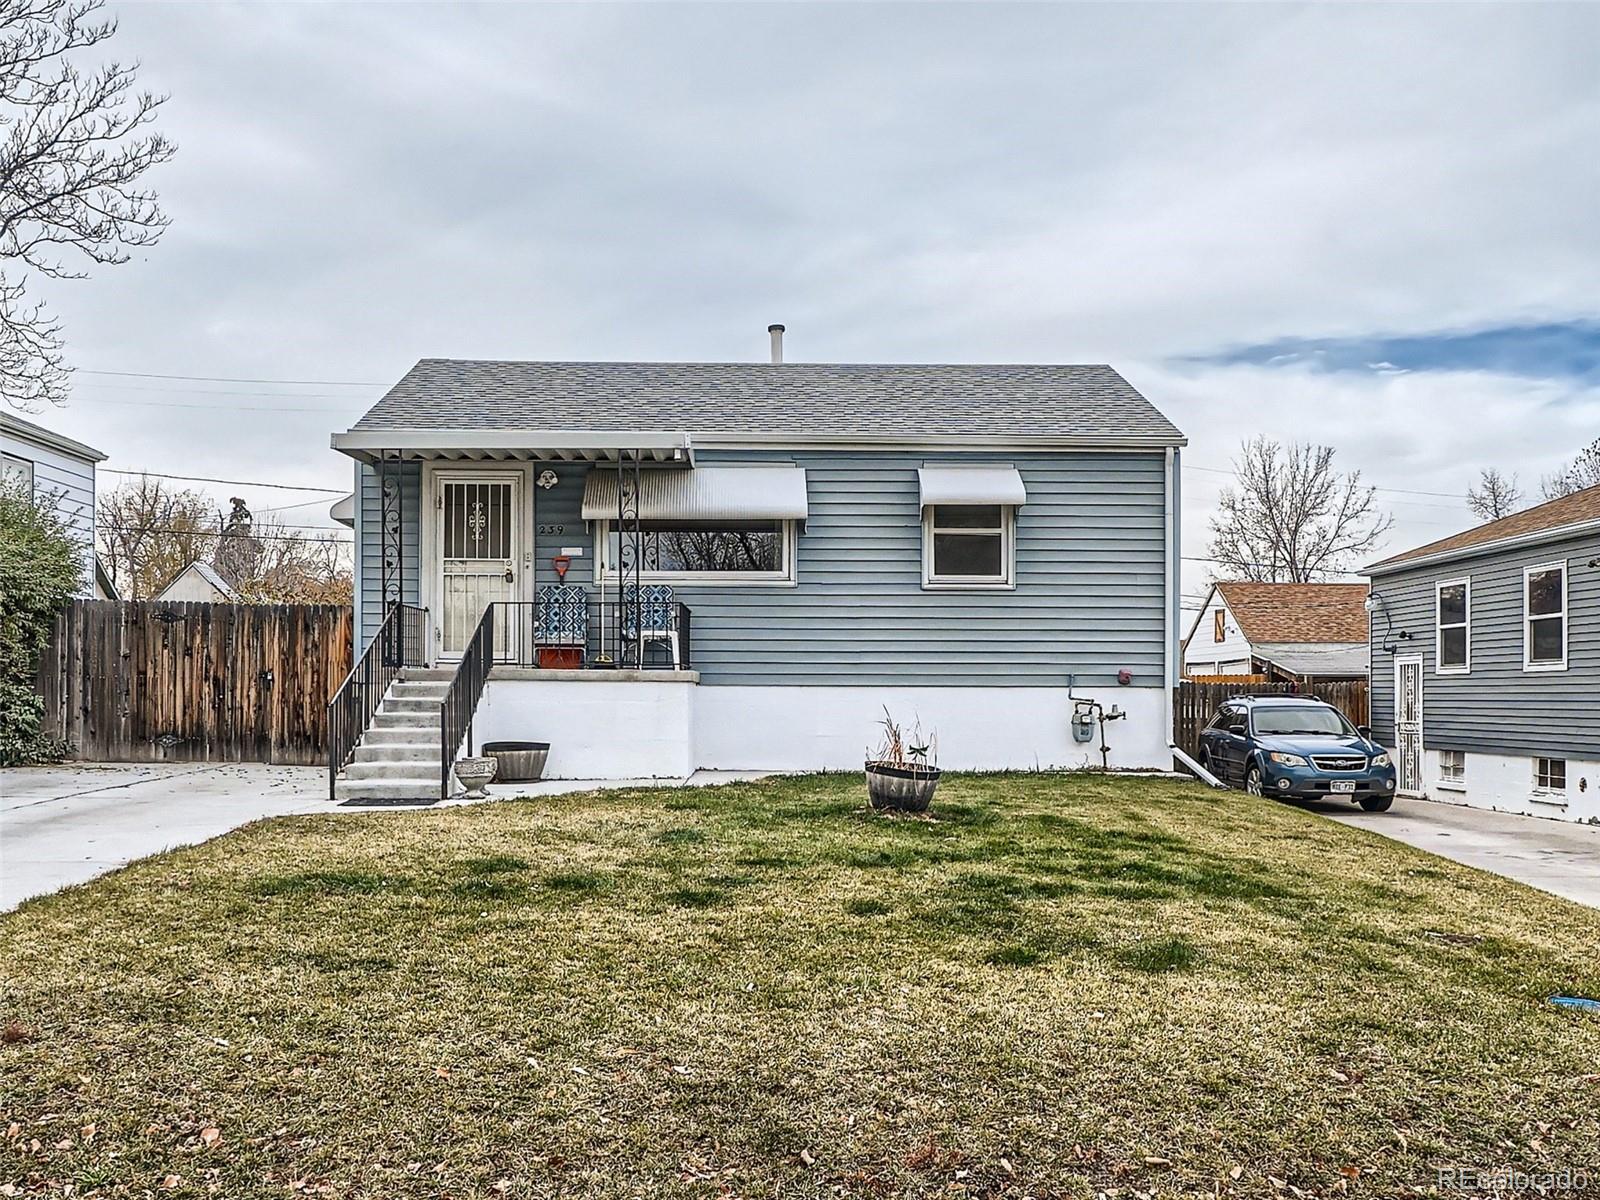 239 s king street, denver sold home. Closed on 2024-01-18 for $450,000.